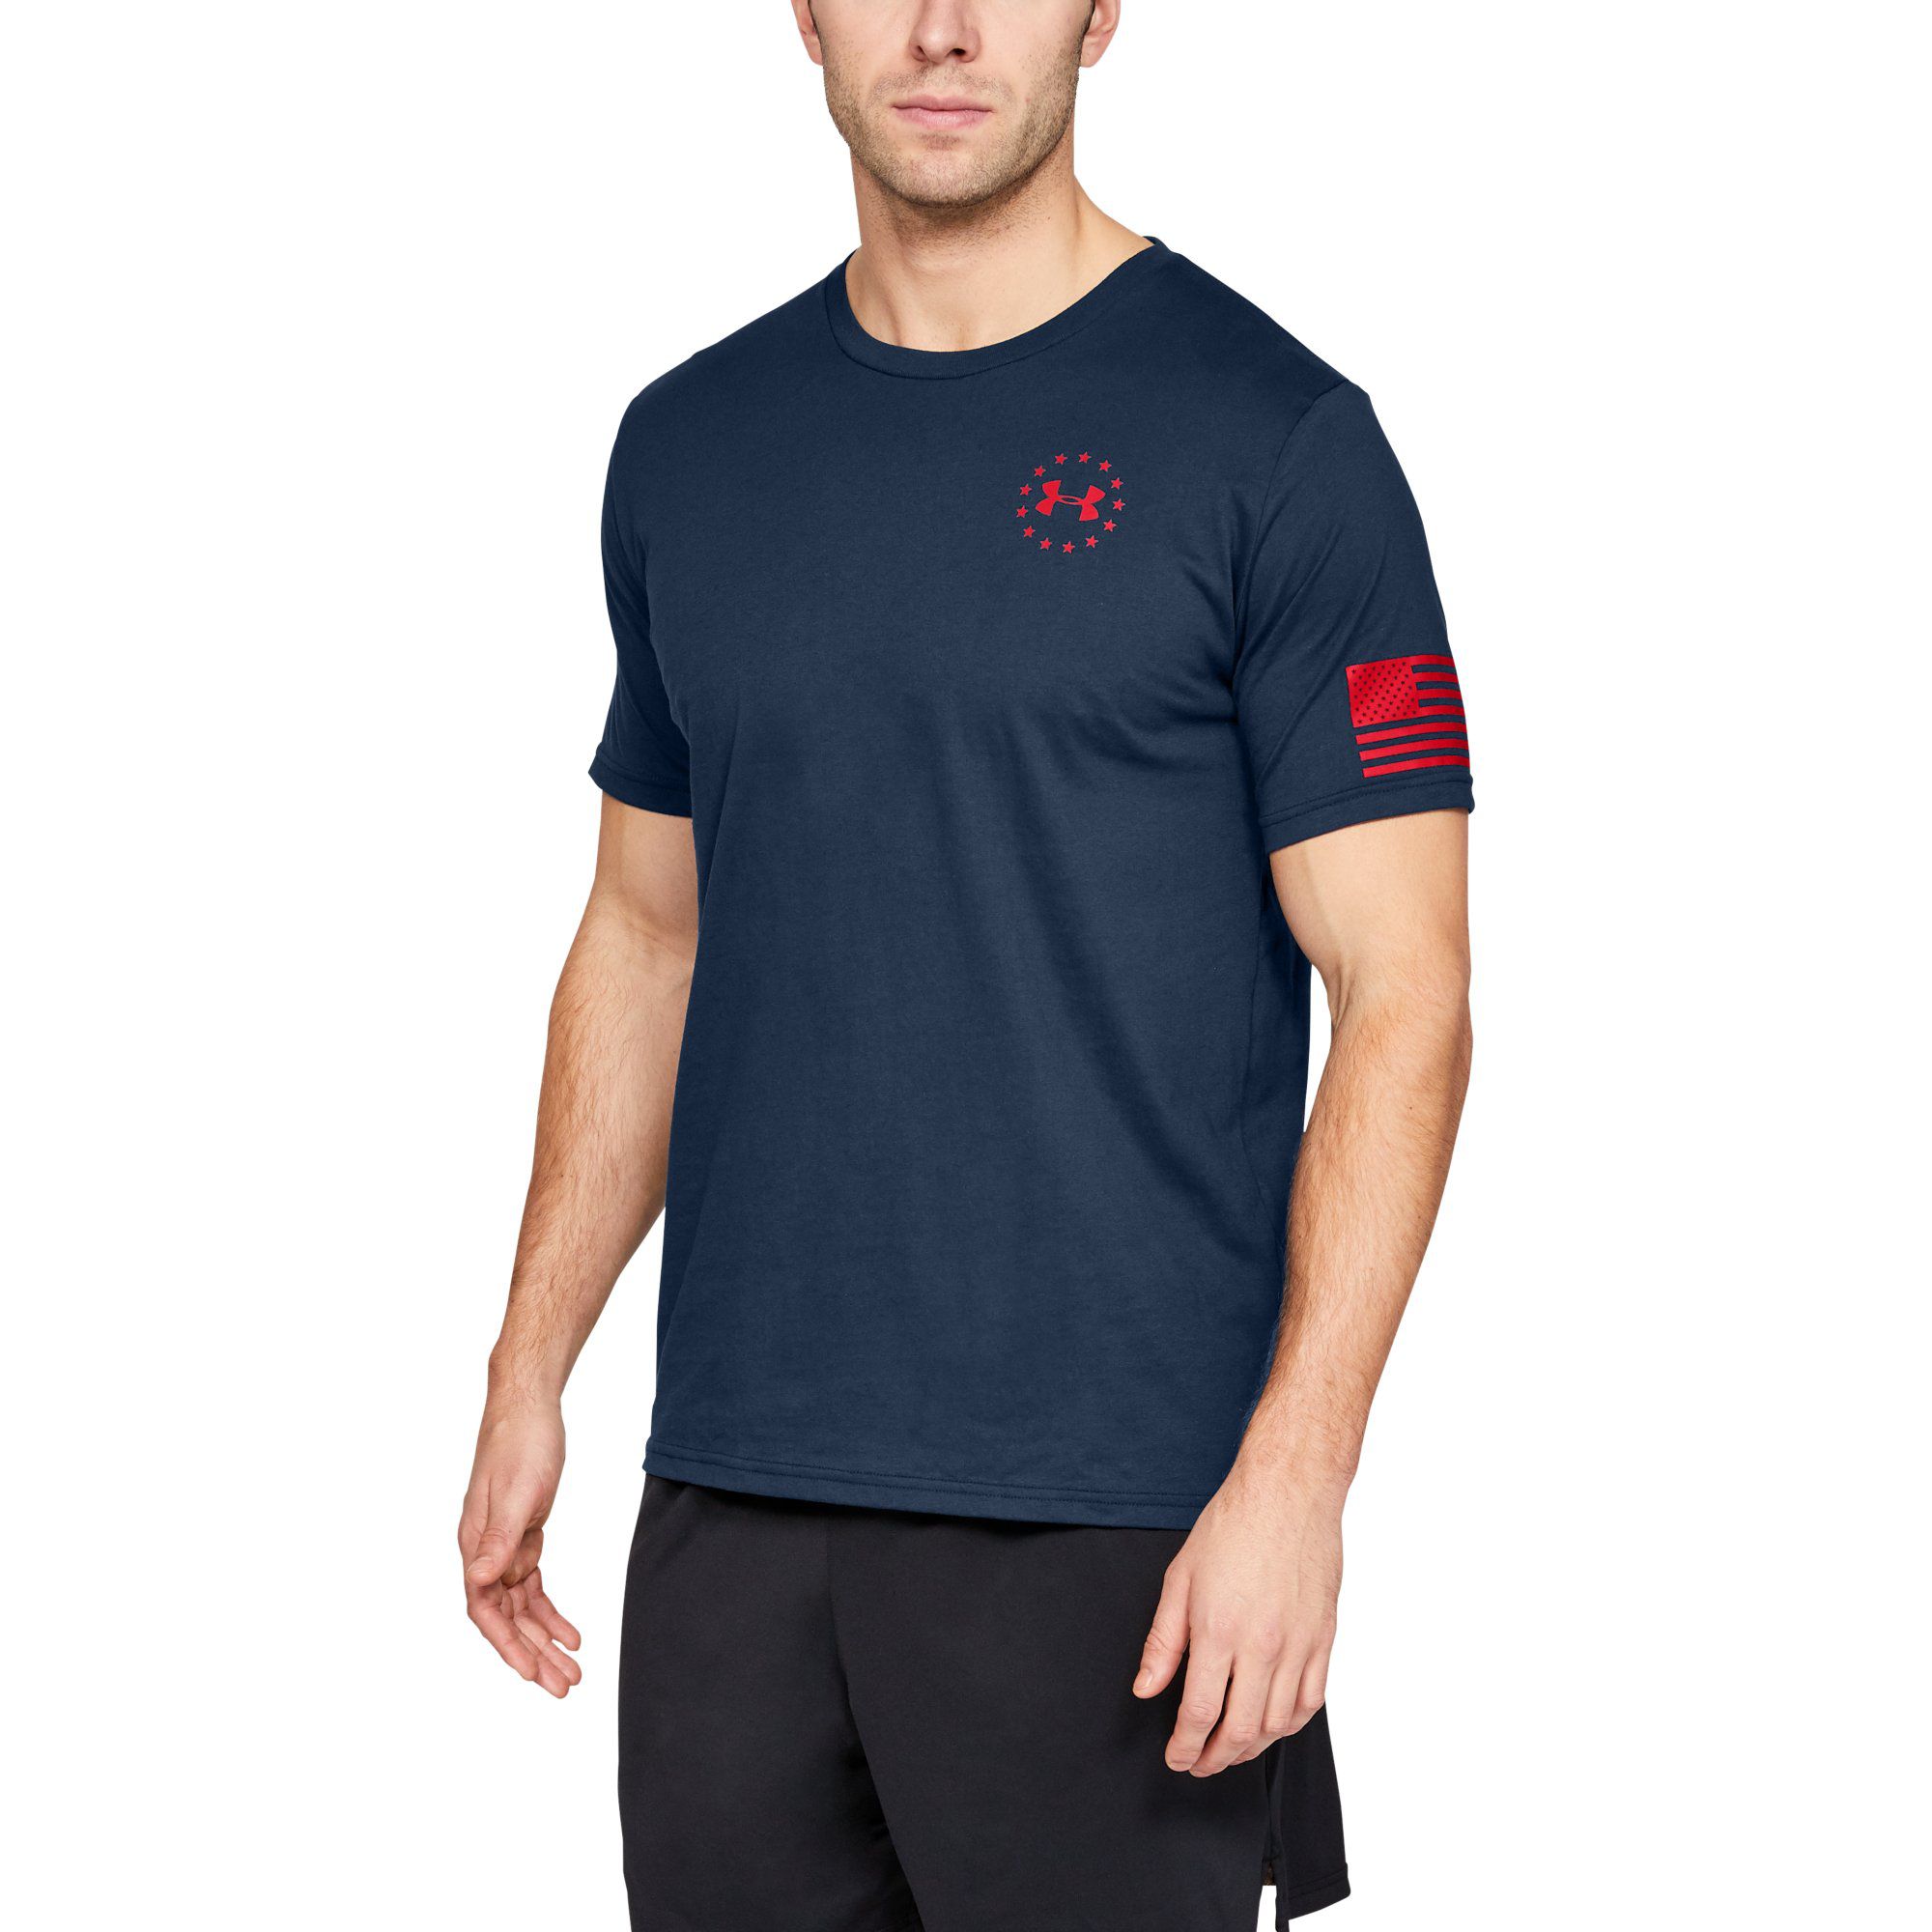 under armour big and tall t shirts